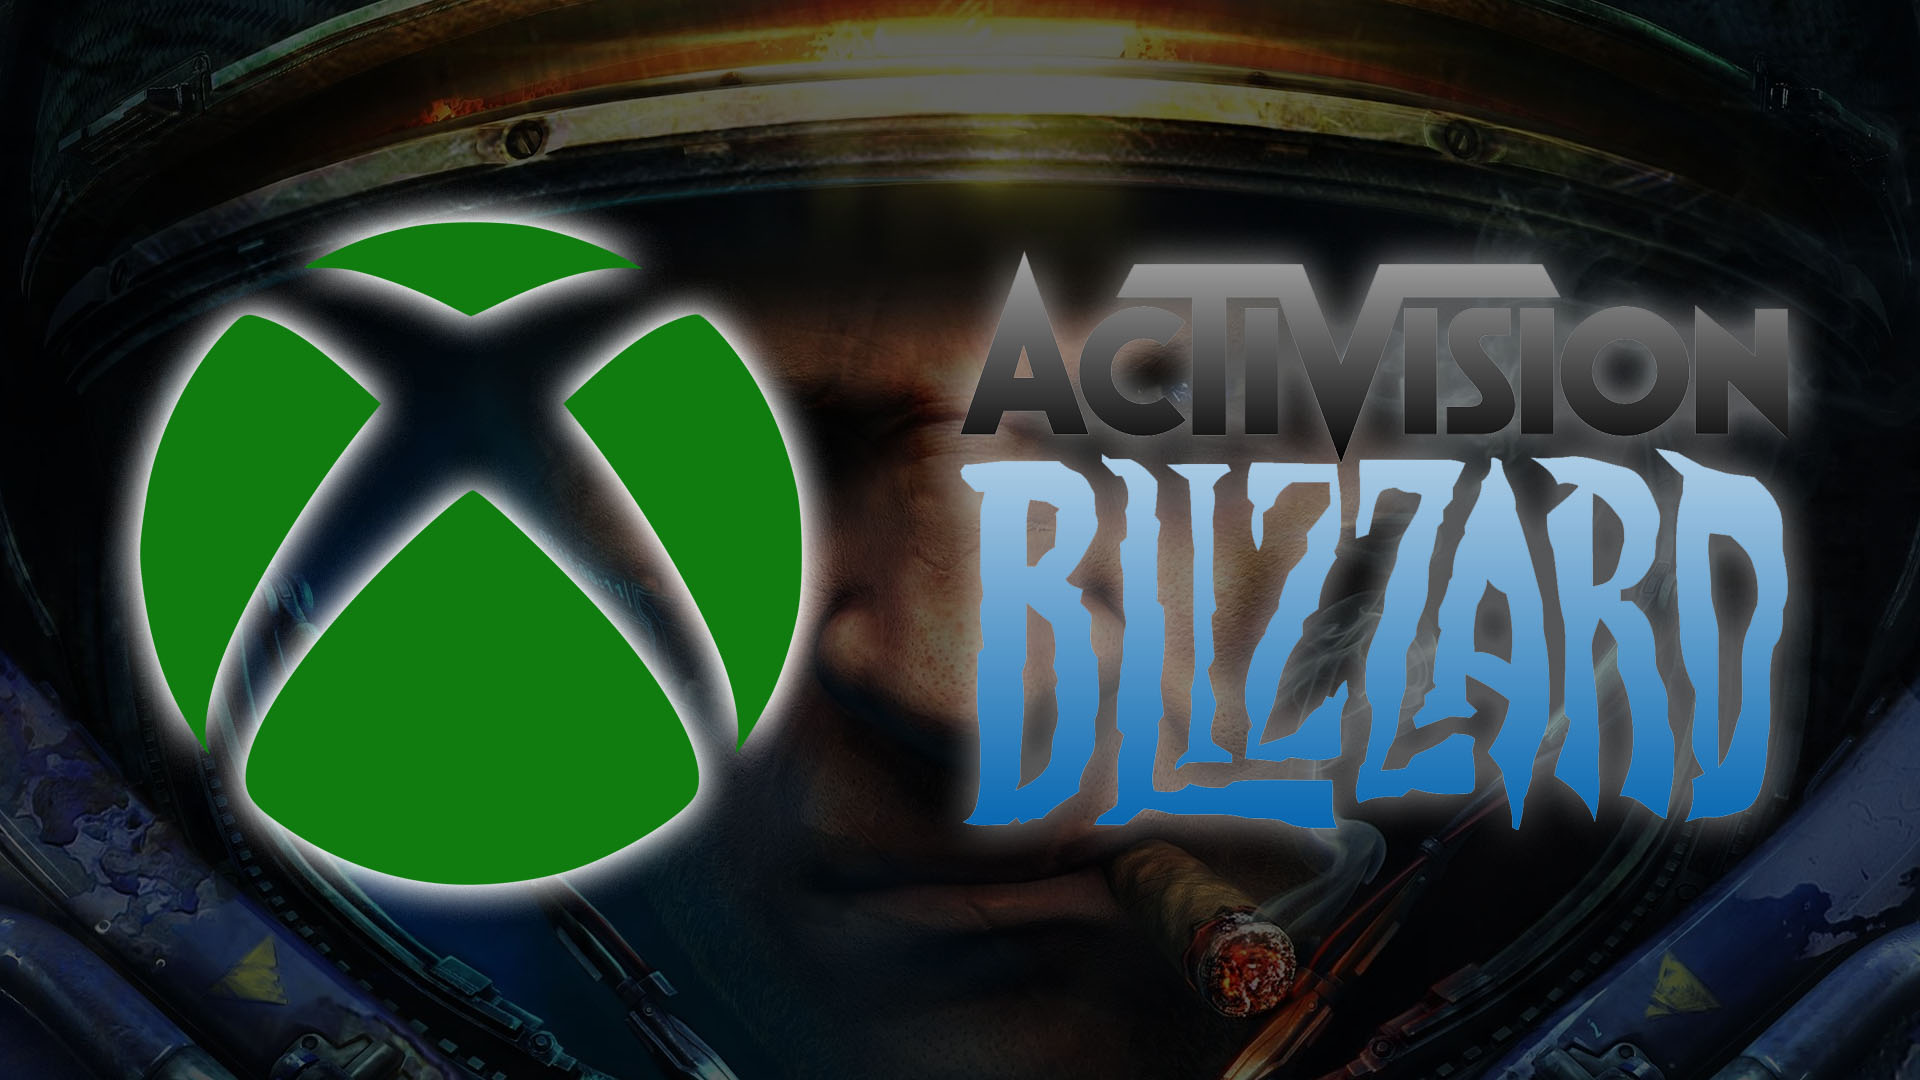 Microsoft hopes to spend Activision Blizzard in a deal that can assemble gaming history